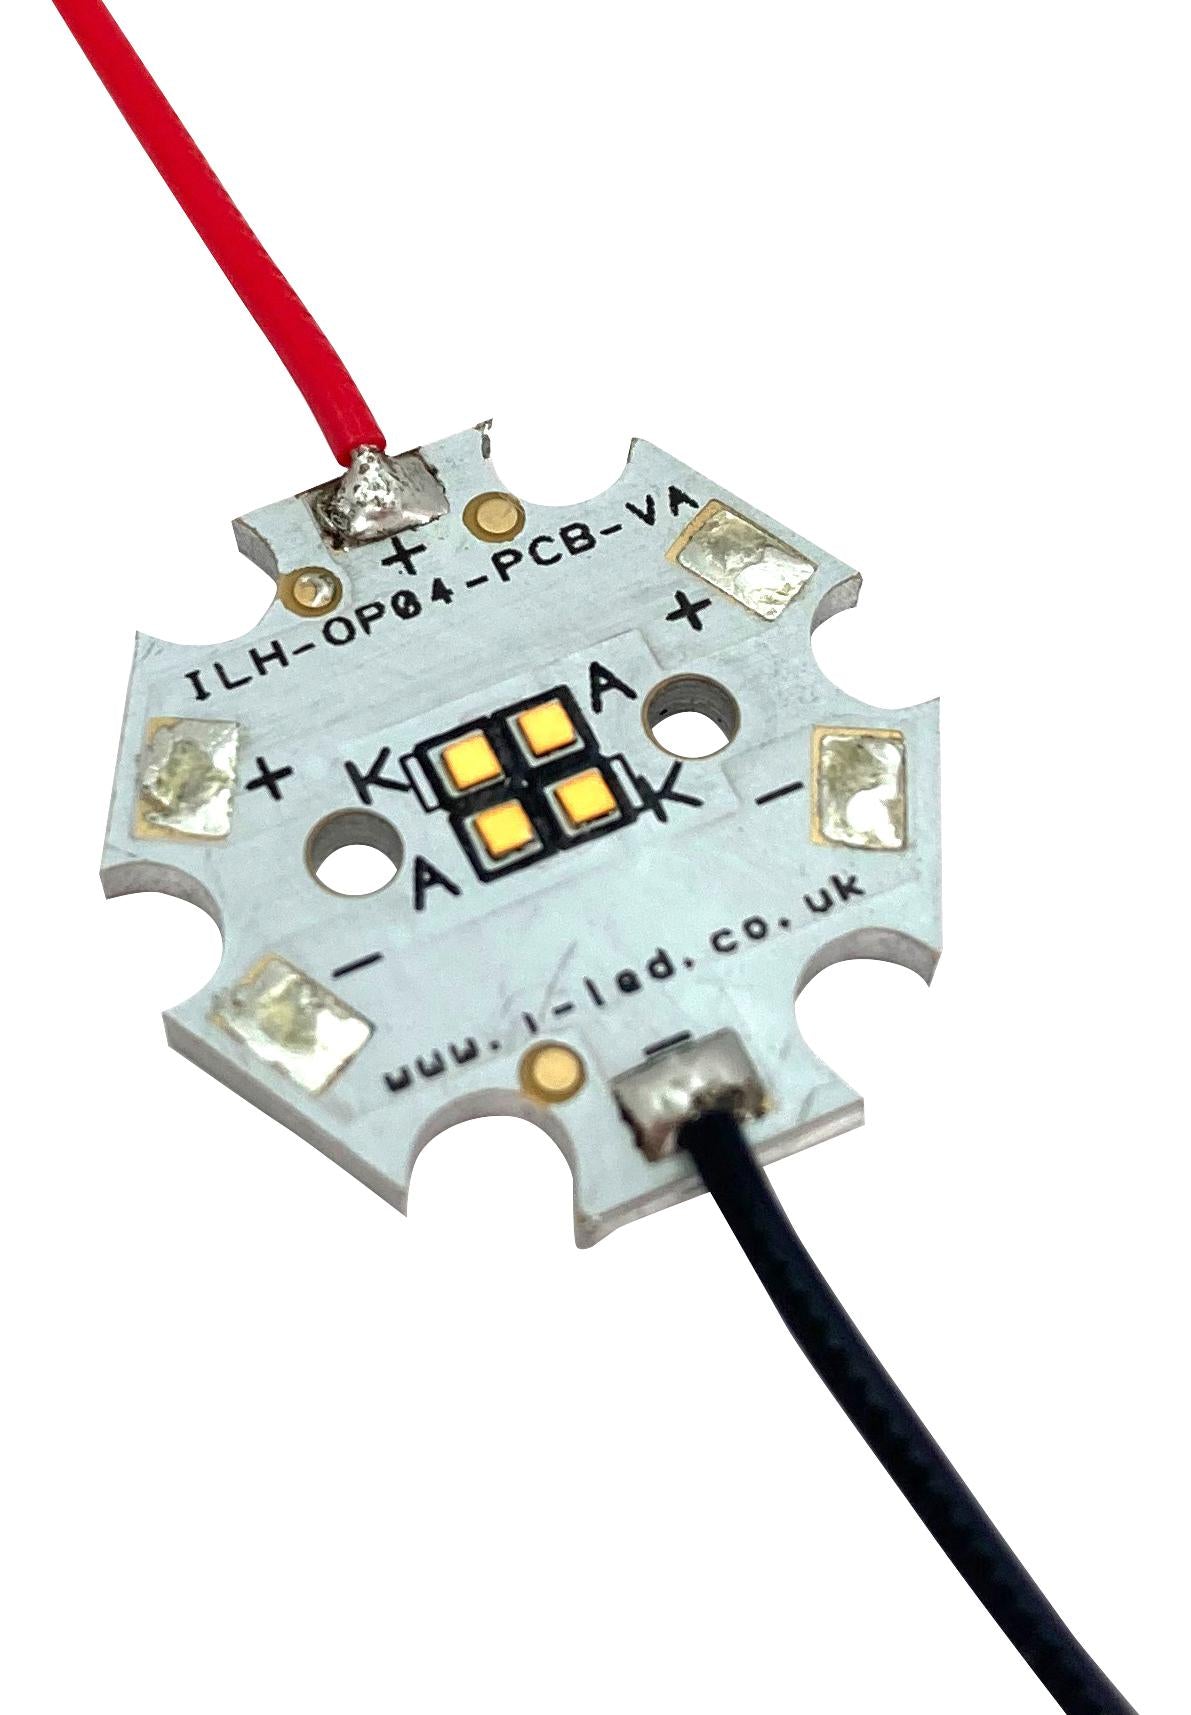 ILH-OP04-PCRE-SC221-WIR200. LED MODULE, RED, 174LM, 630NM, STAR INTELLIGENT LED SOLUTIONS